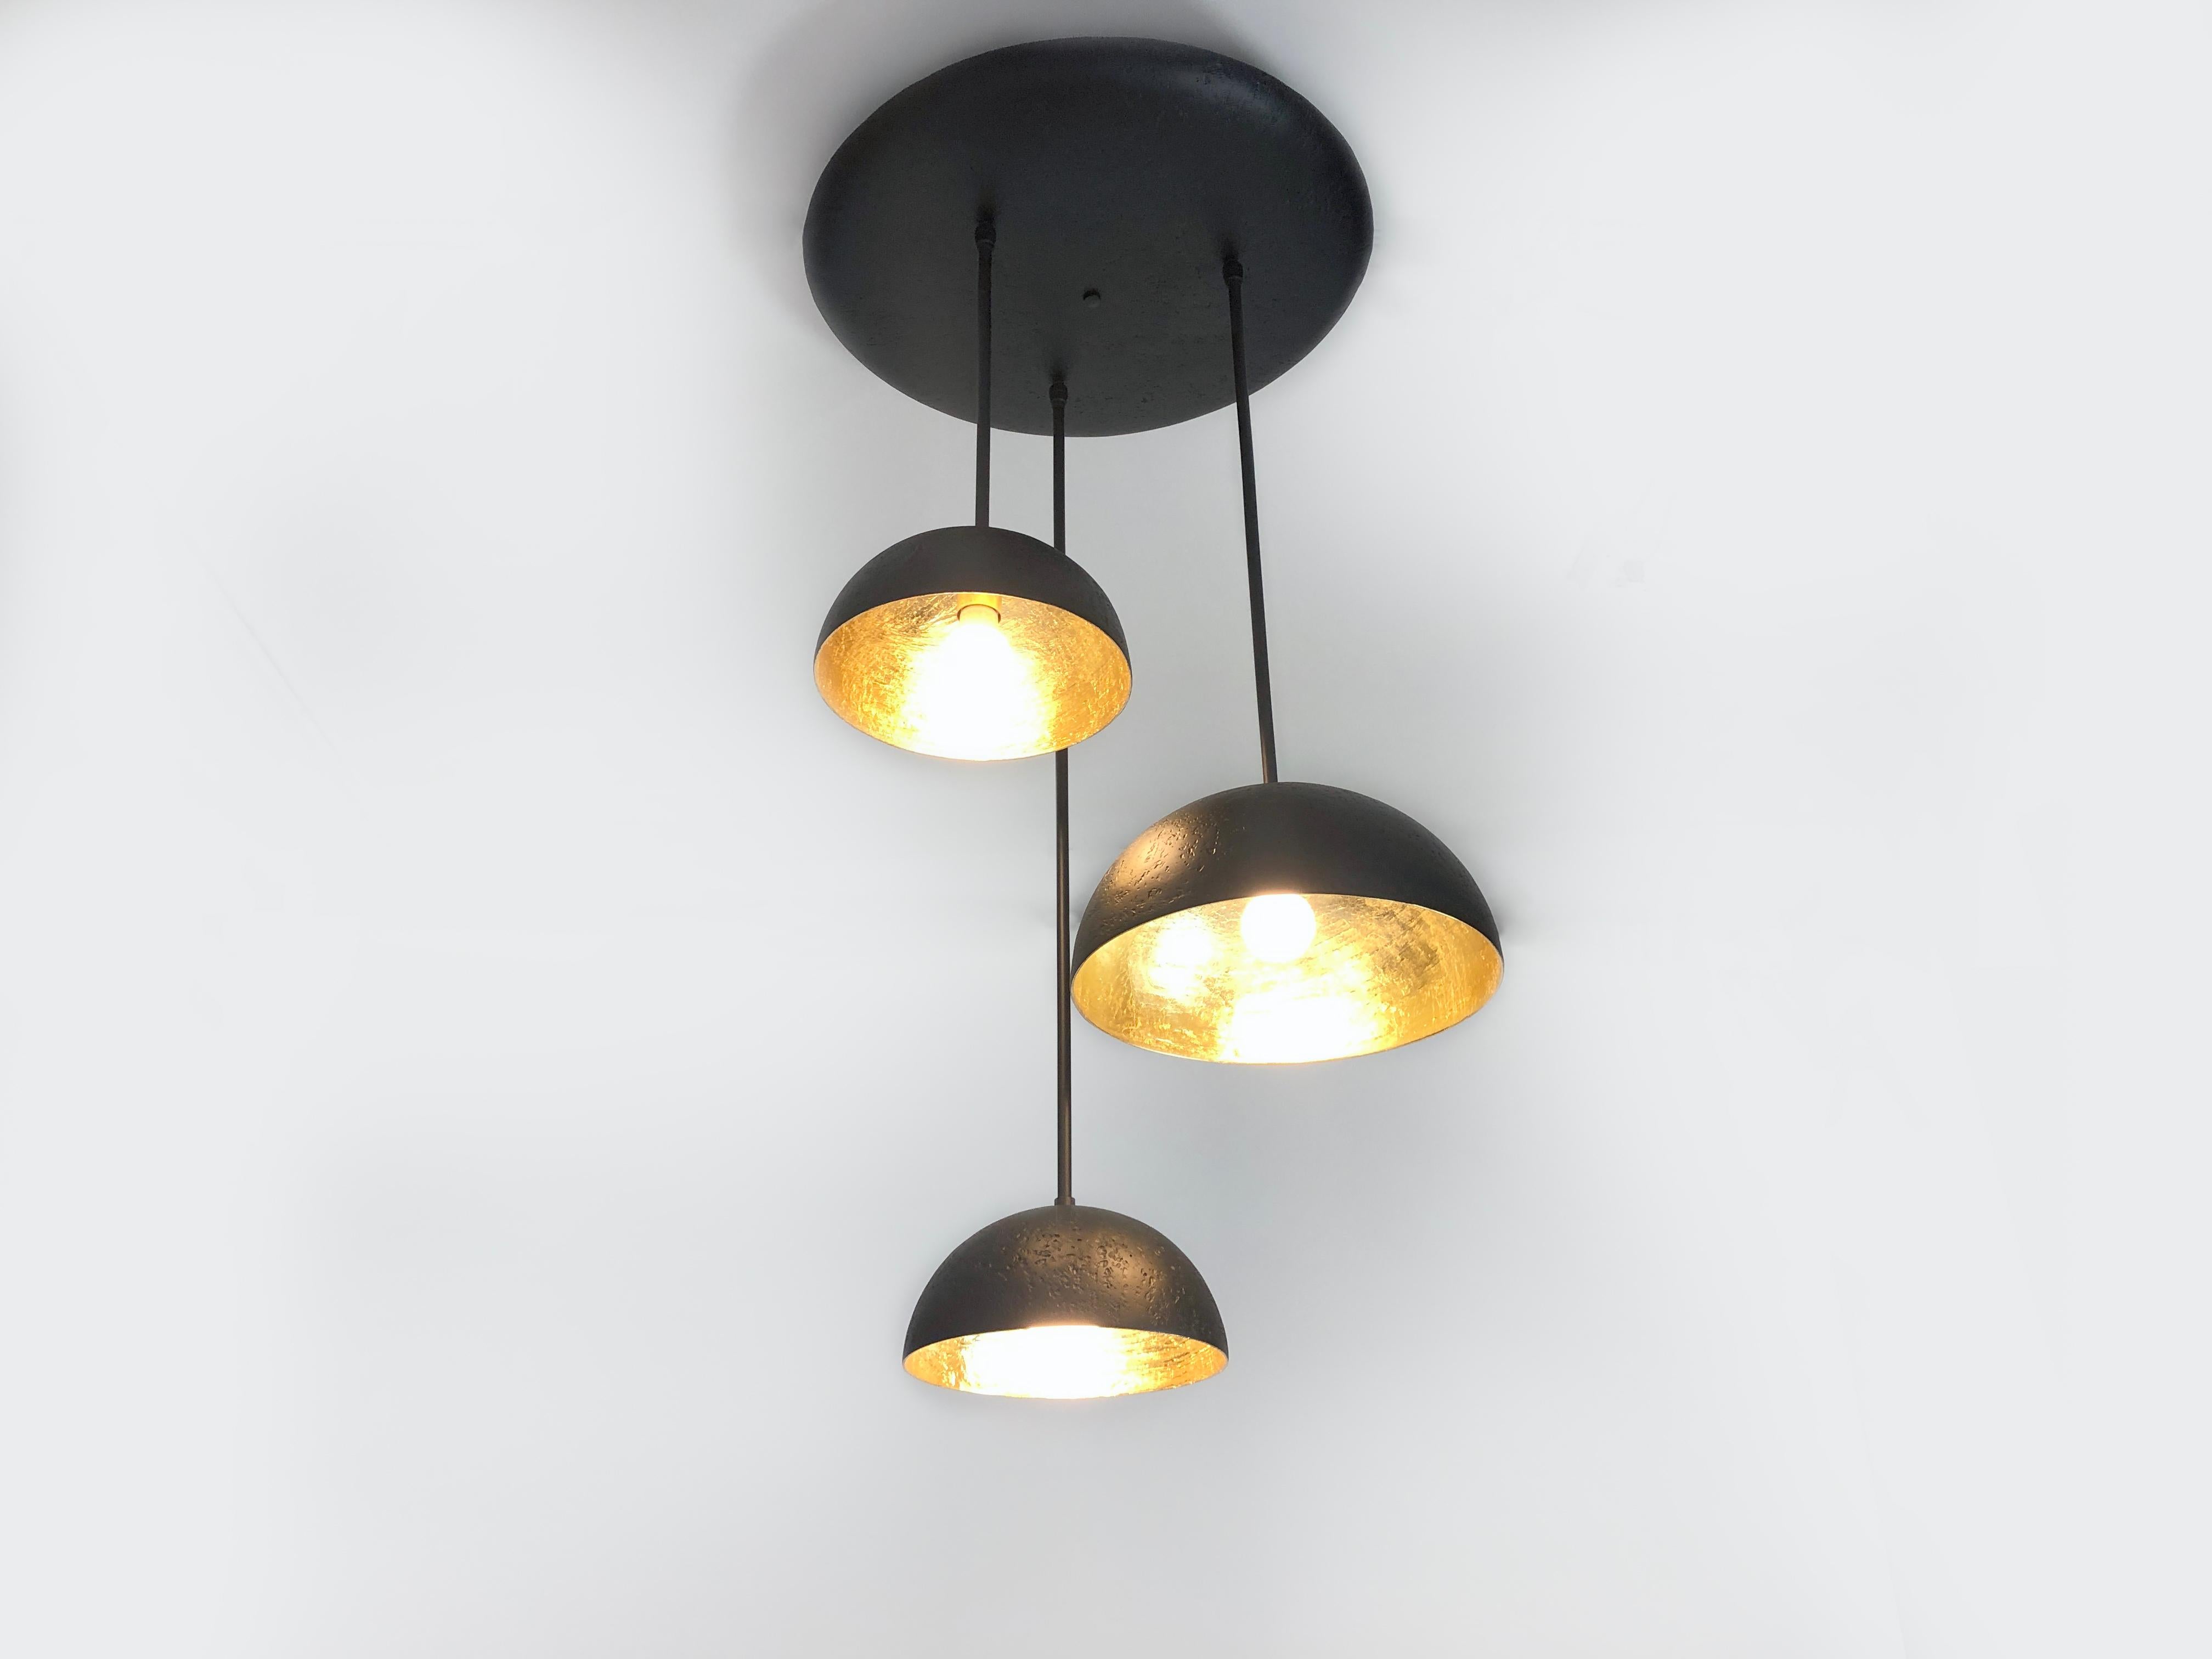 Three pendant chandelier. The finish of the hand crafted plaster of Paris domes and canopy are matte black. This accents the gold leafed interiors of the domes. This chandelier can be customized to work for each project. Light uses three medium